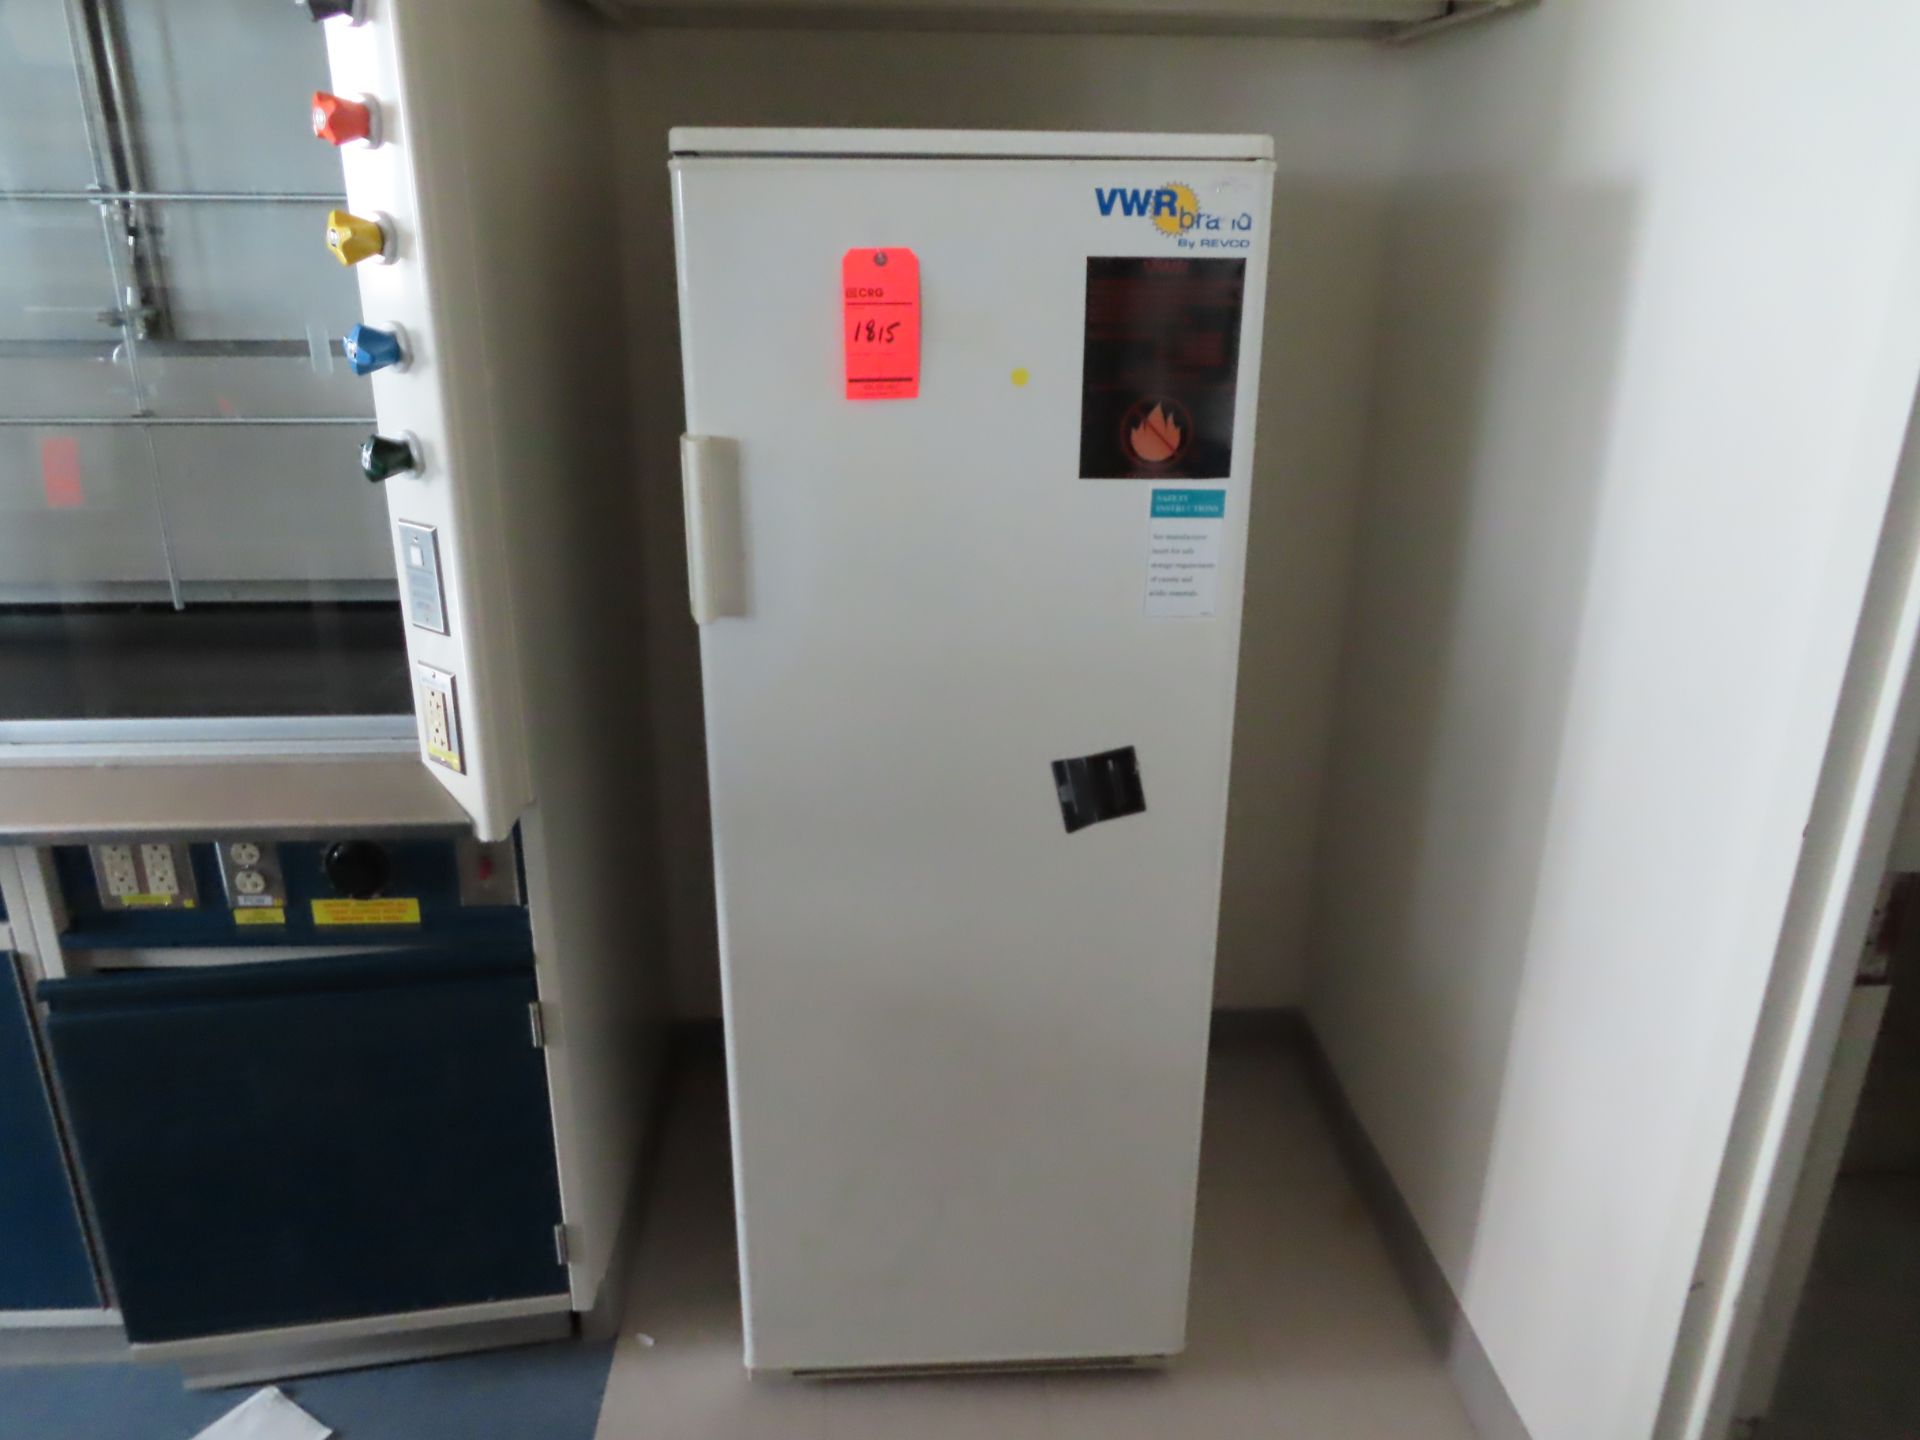 VWR flammable materials storage refrigerator, located in B wing, 4th floor, room 436E